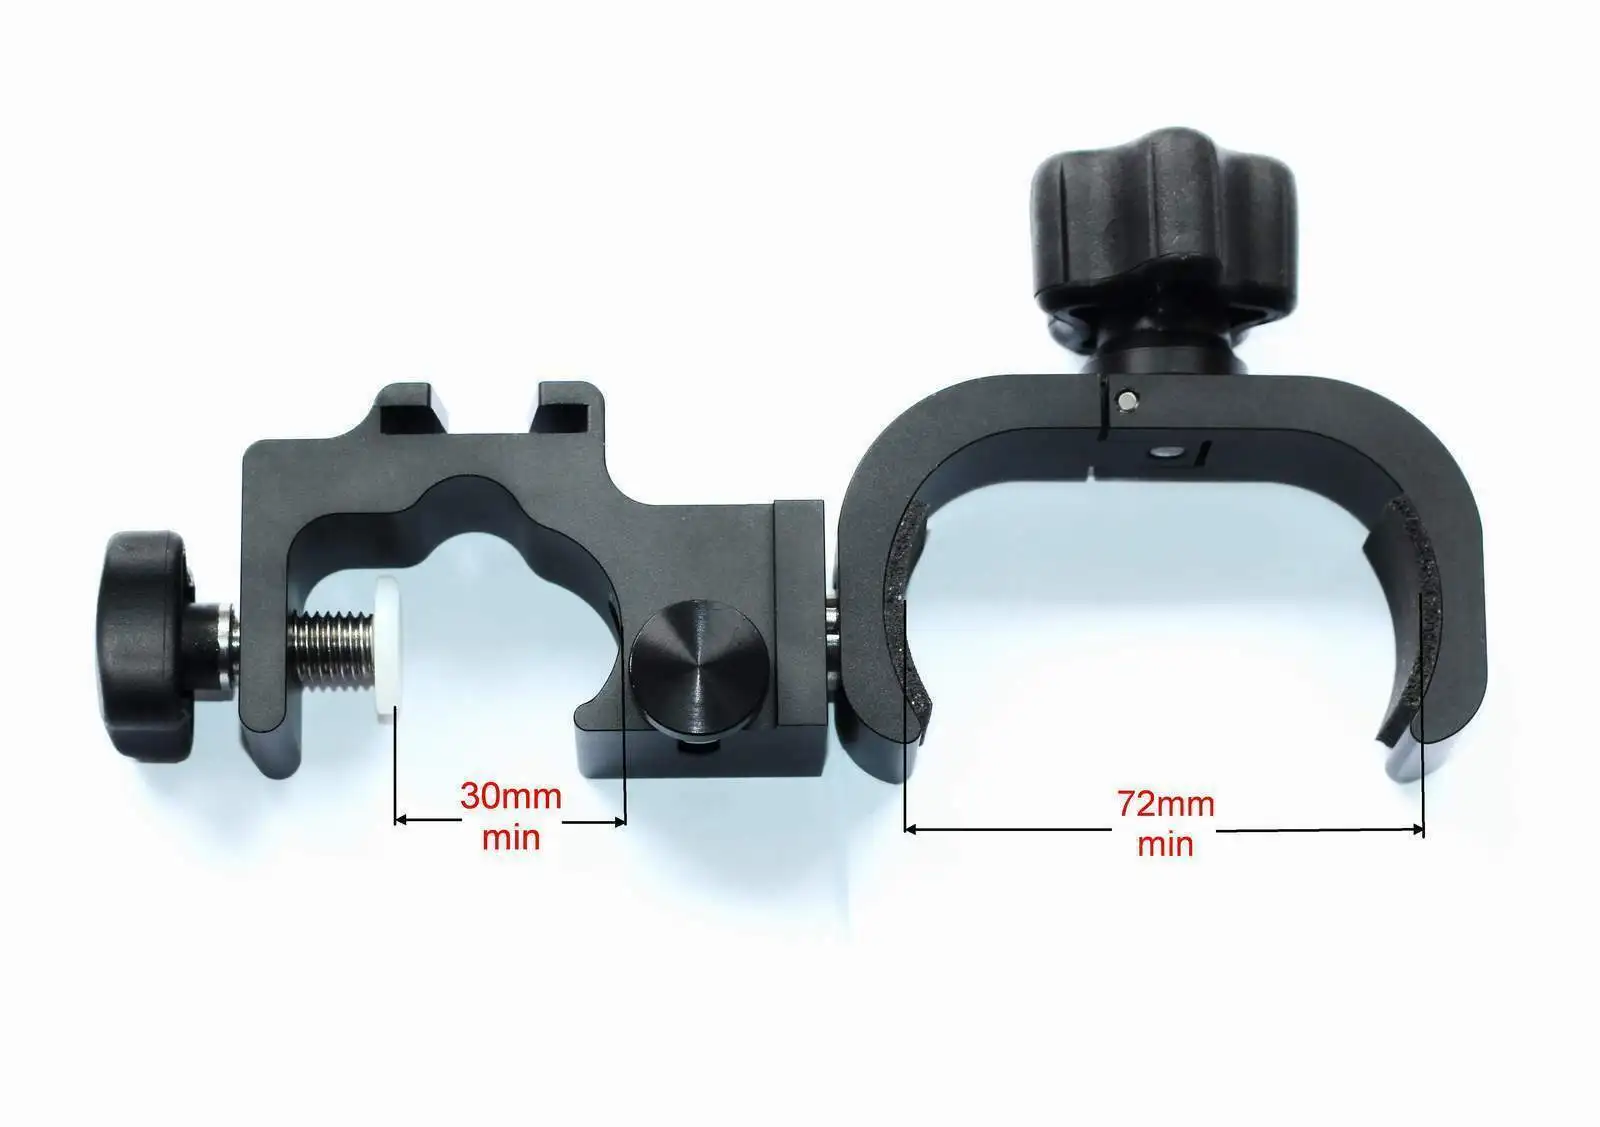 

New Bracket with Battery Slot and Quick Release Claw Cradle, GeoExplorer Geo CE, TSCE TSC2 GPS Mount / Range Pole